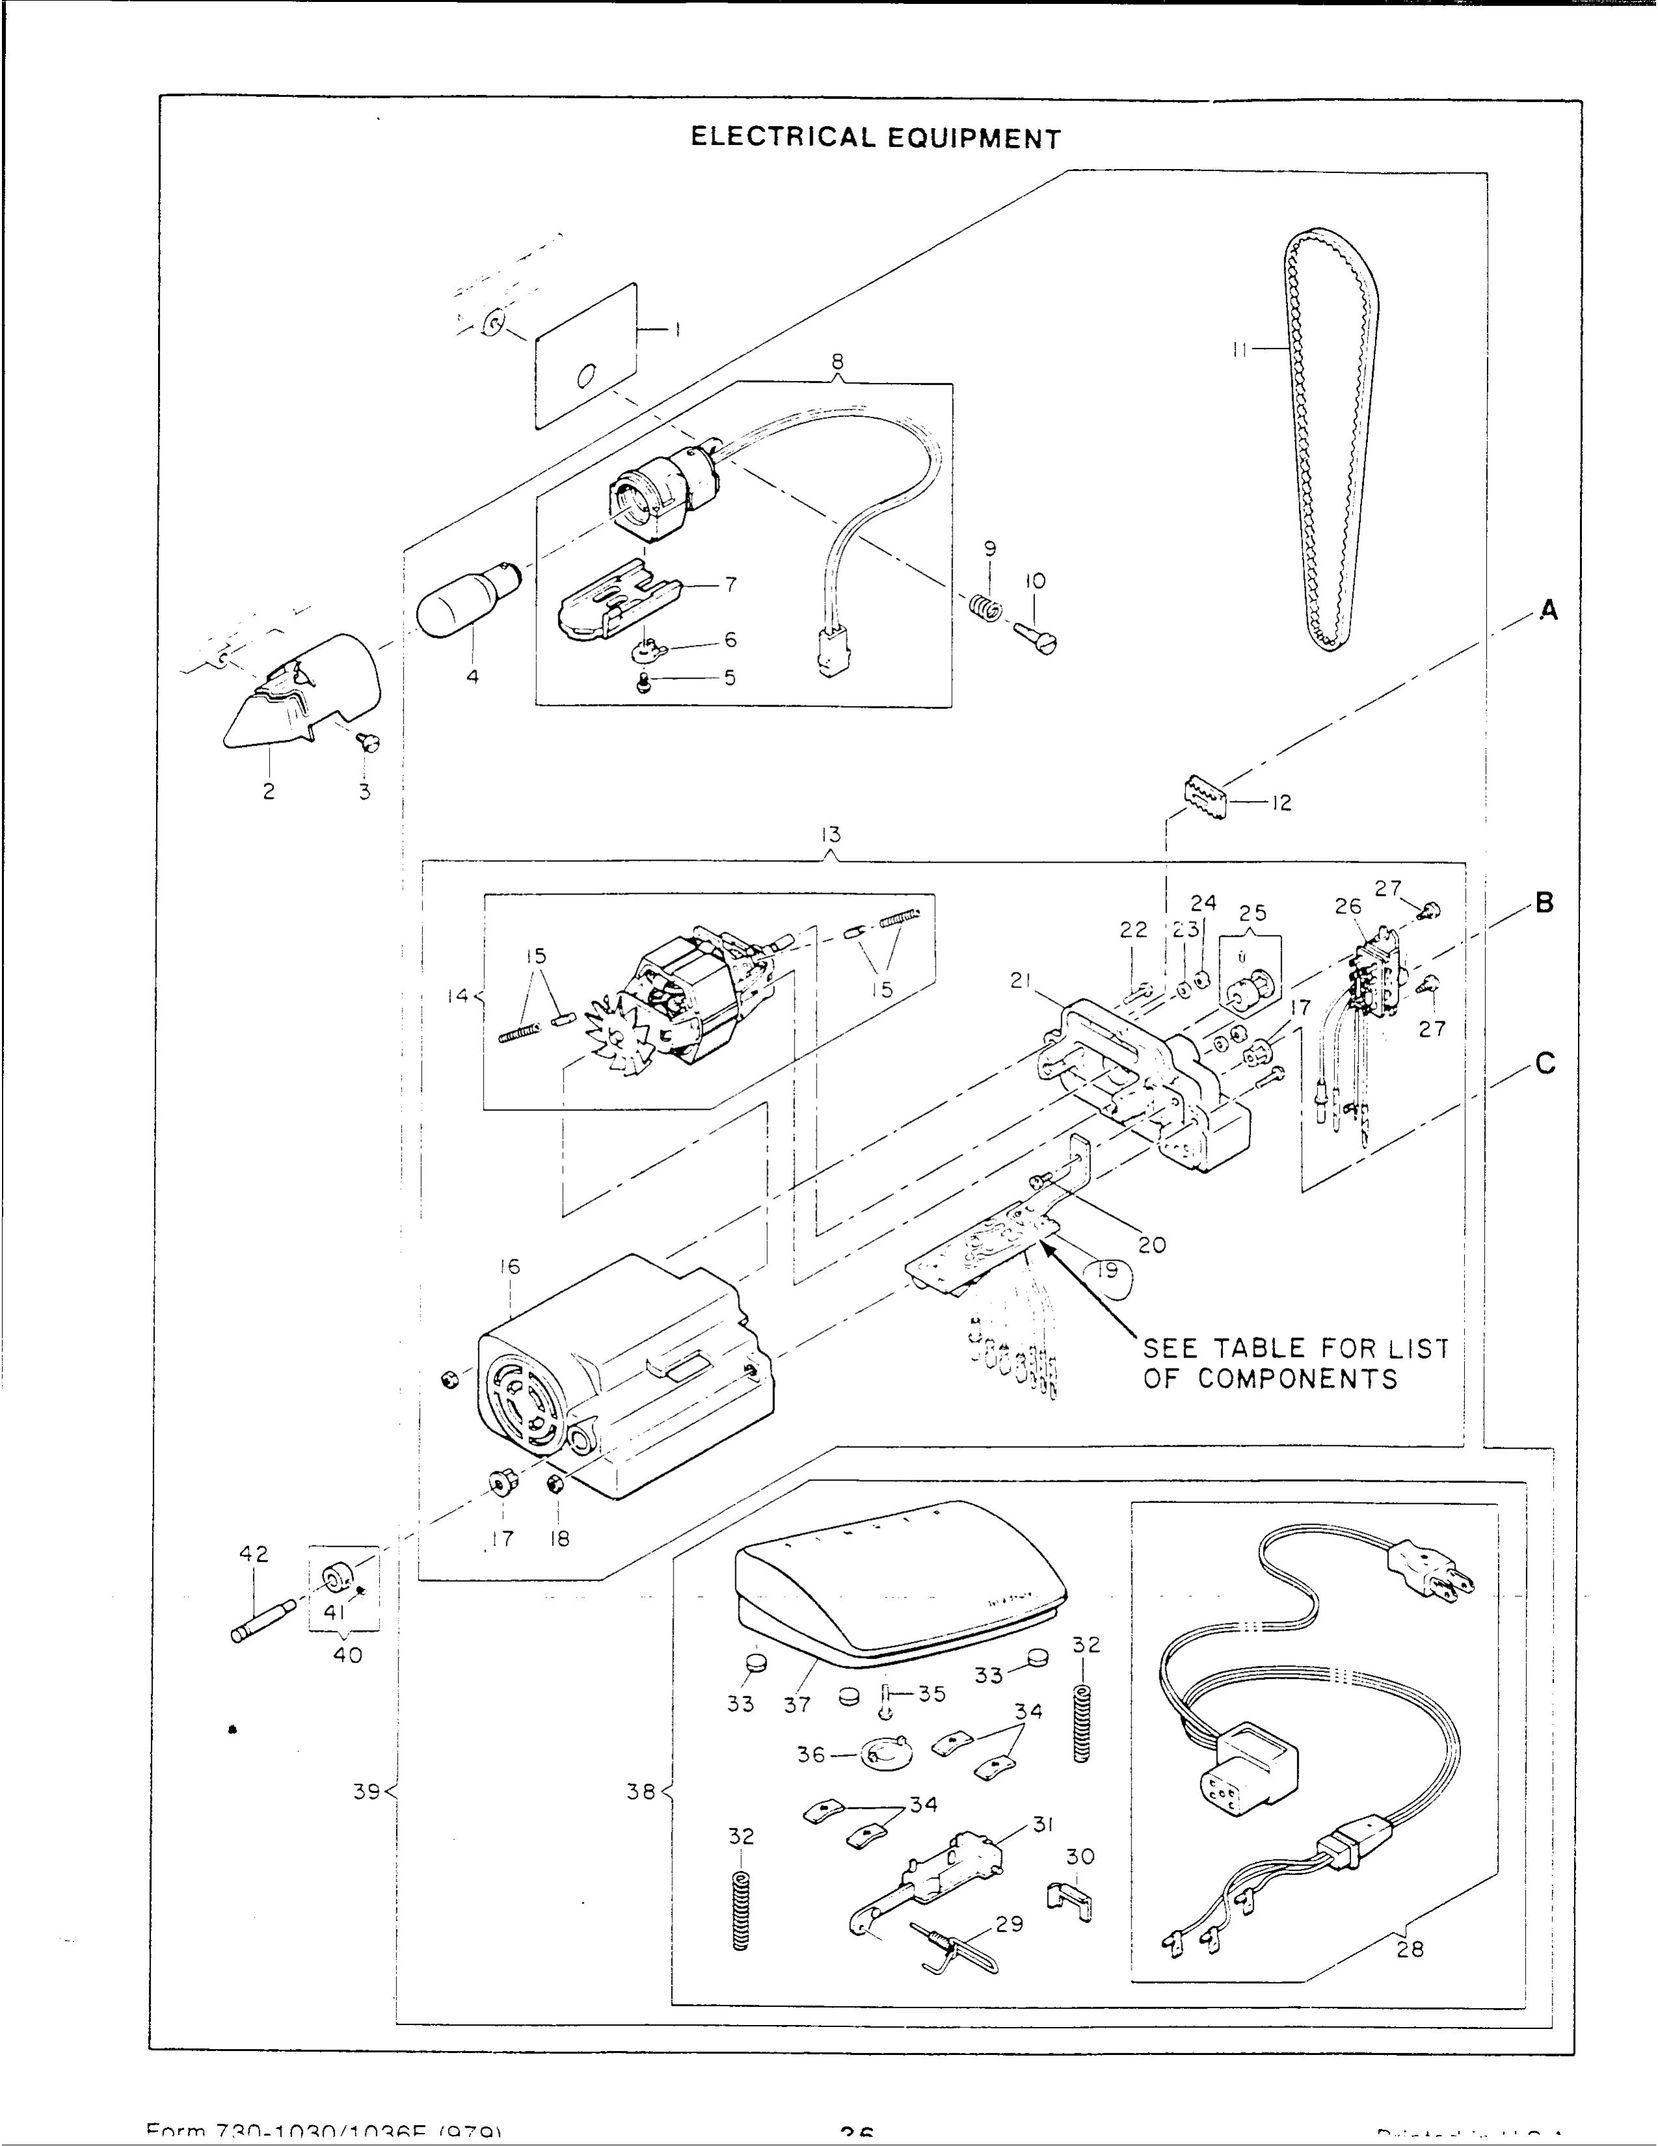 Singer 1036E Sewing Machine User Manual (Page 36)